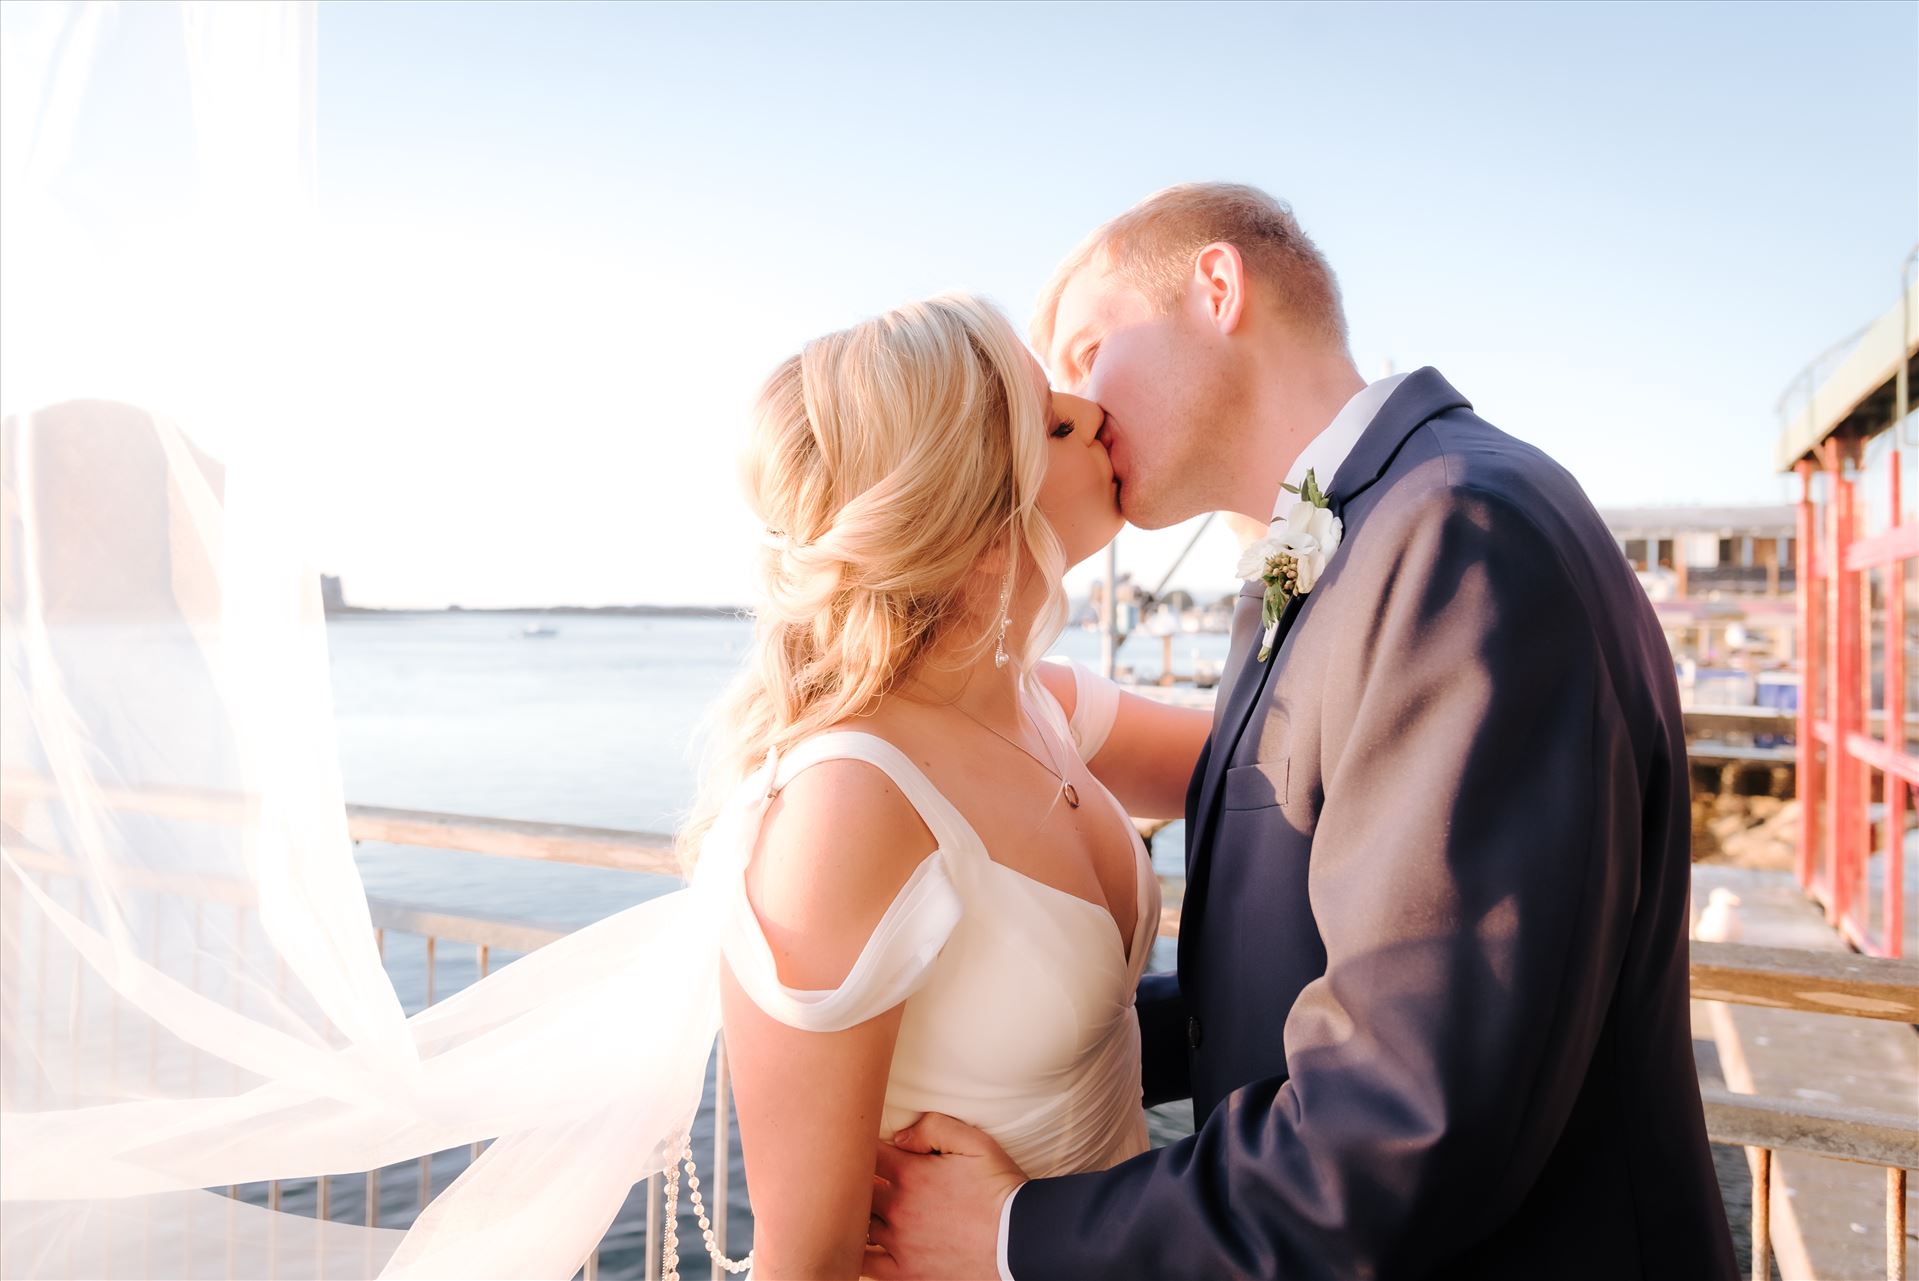 FW-9774.JPG - Sarah Williams of Mirror's Edge Photography, a San Luis Obispo Wedding and Engagement Photographer, captures Ryan and Joanna's wedding at the iconic Windows on the Water Restaurant in Morro Bay, California.  Bride and Groom kiss with ocean in background by Sarah Williams